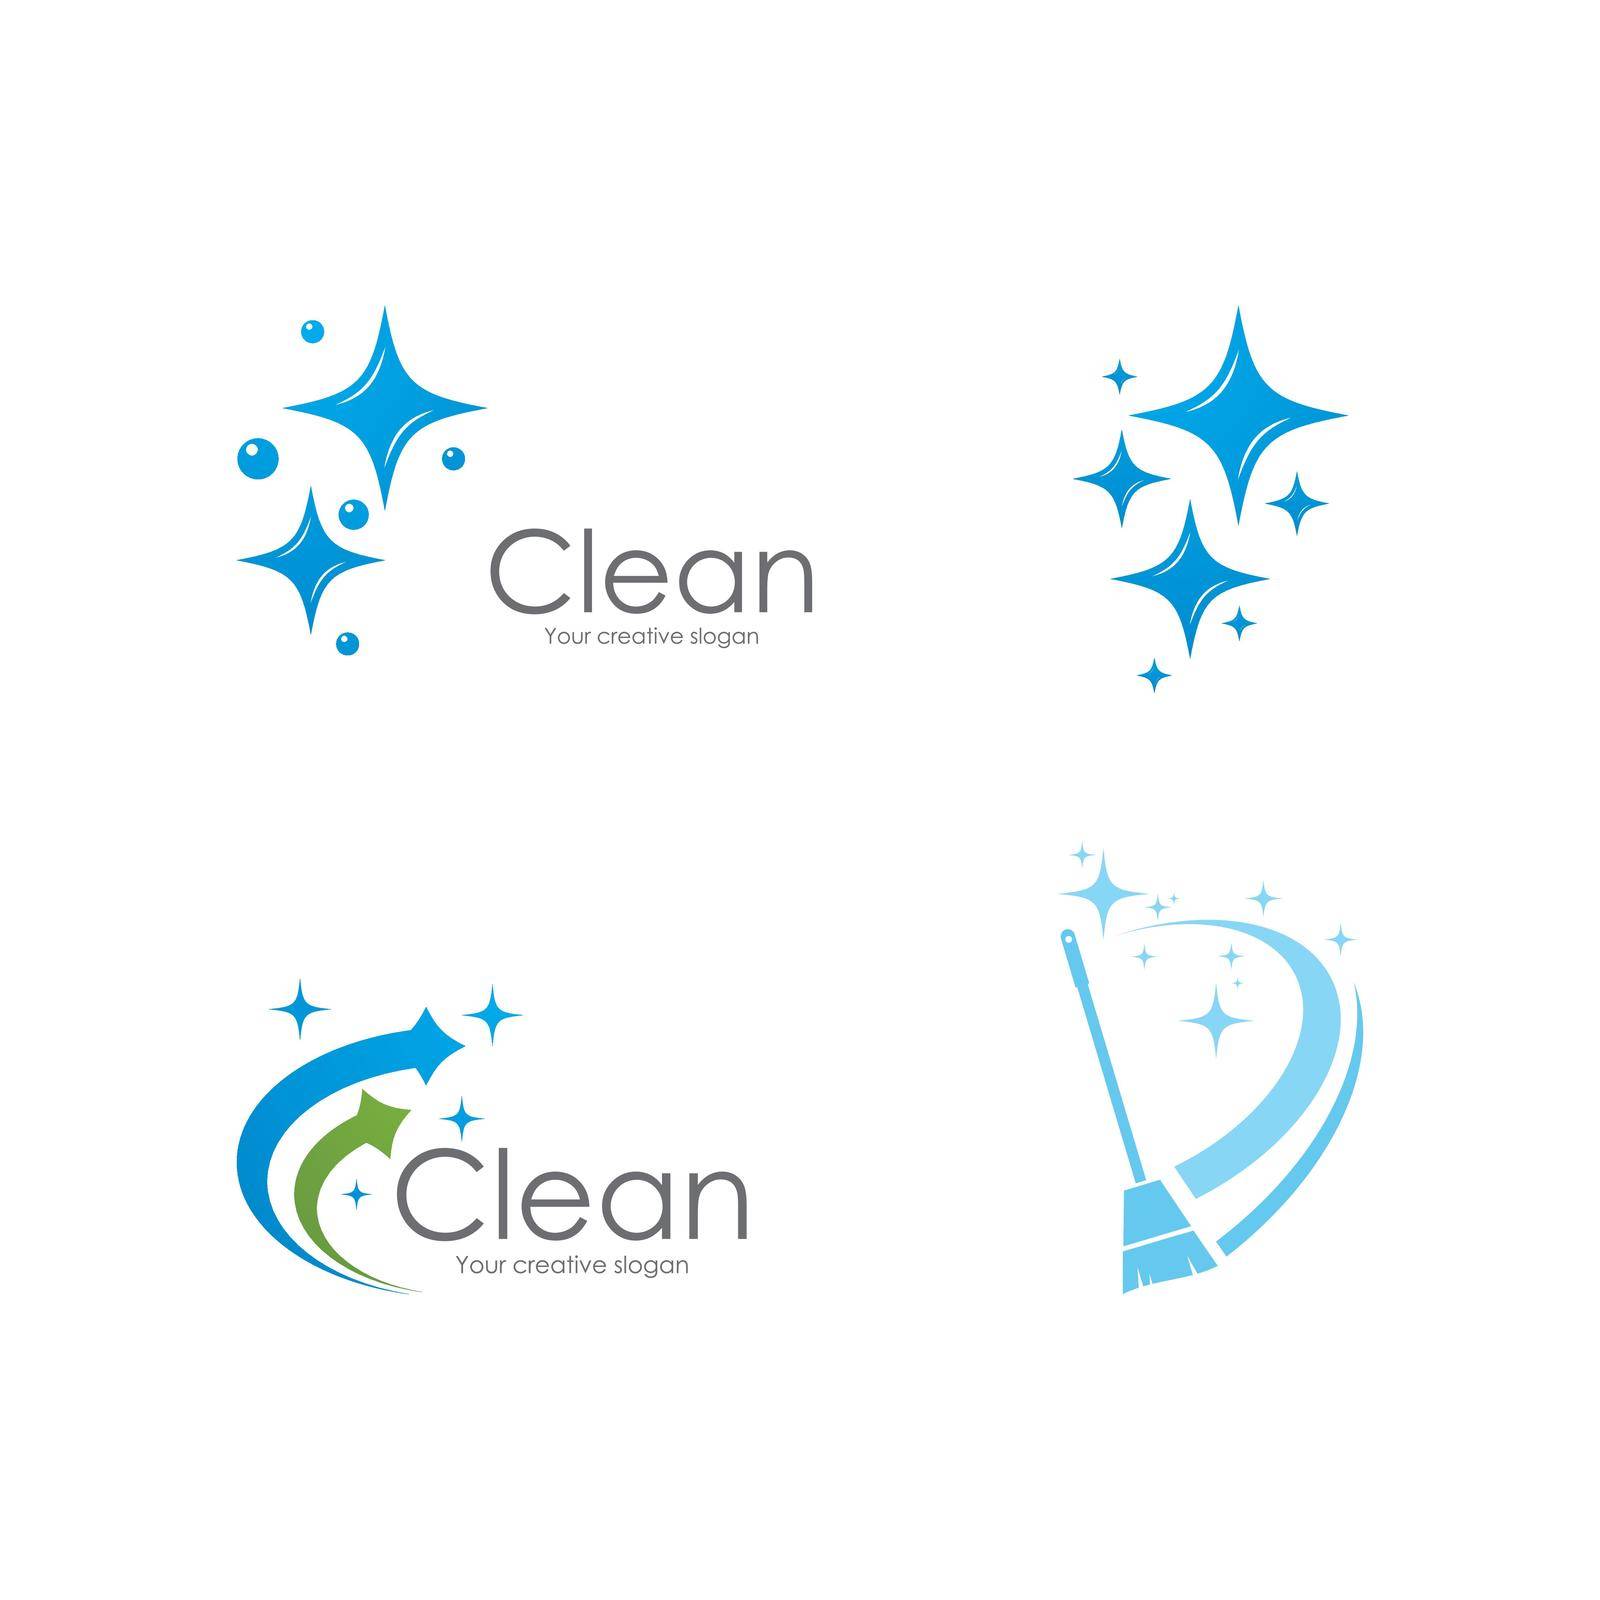 Cleaning logo and symbol by awk